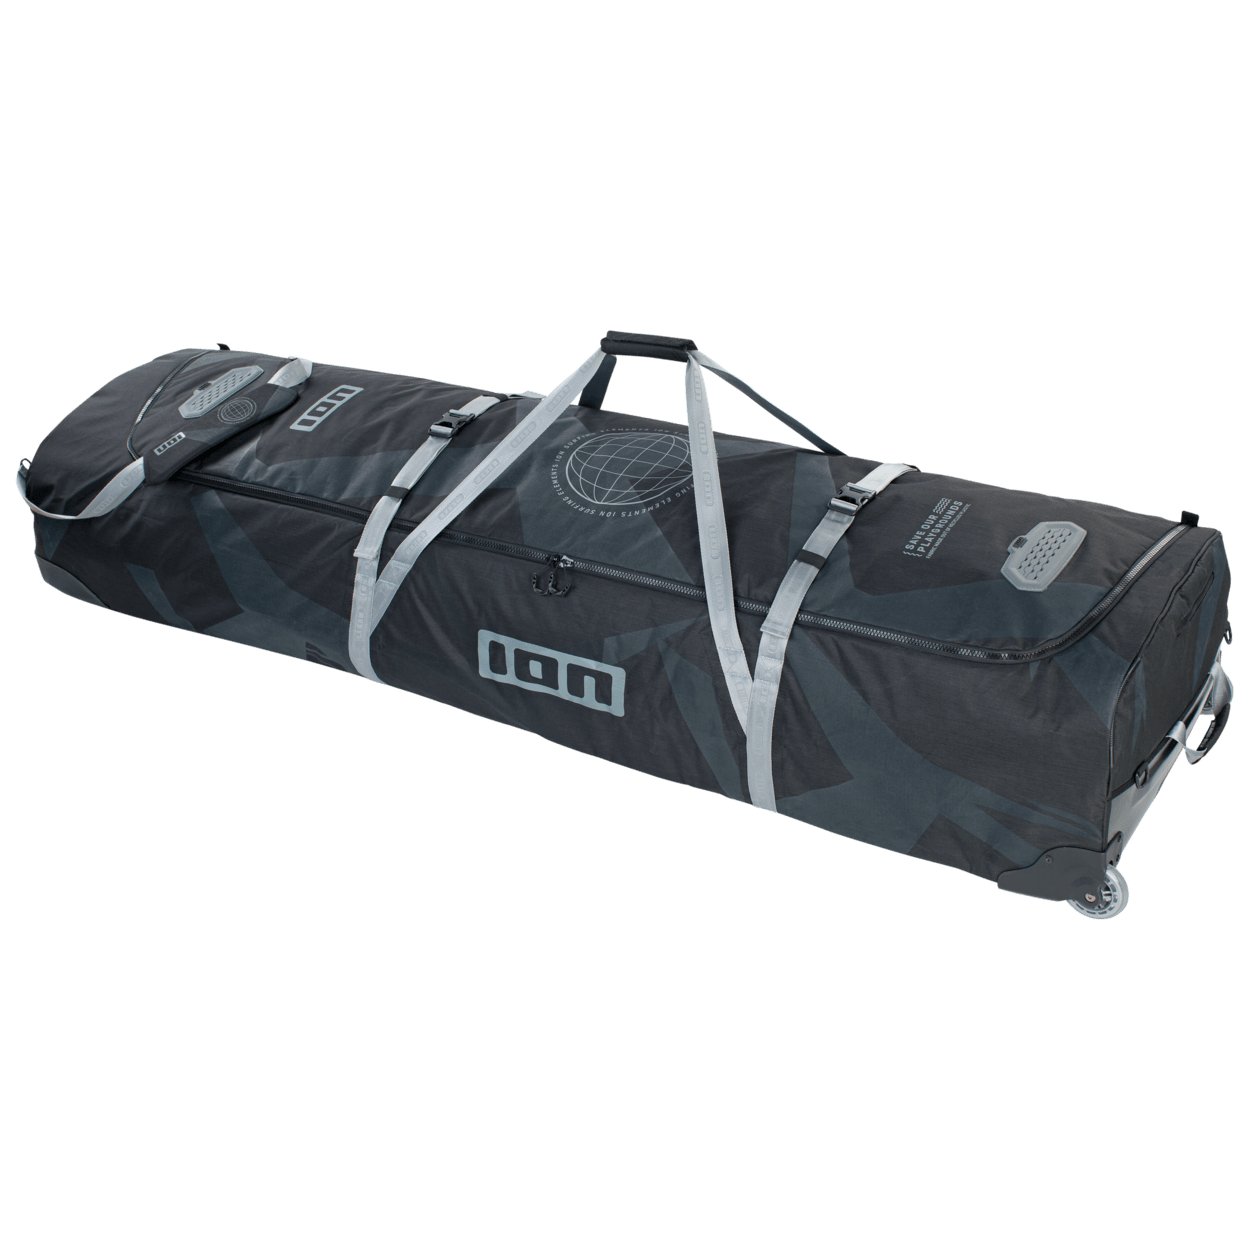 ION Gearbag Tec Wing and Kite Travel bag 2022 - Worthing Watersports - 9010583059778 - Bags - ION Water